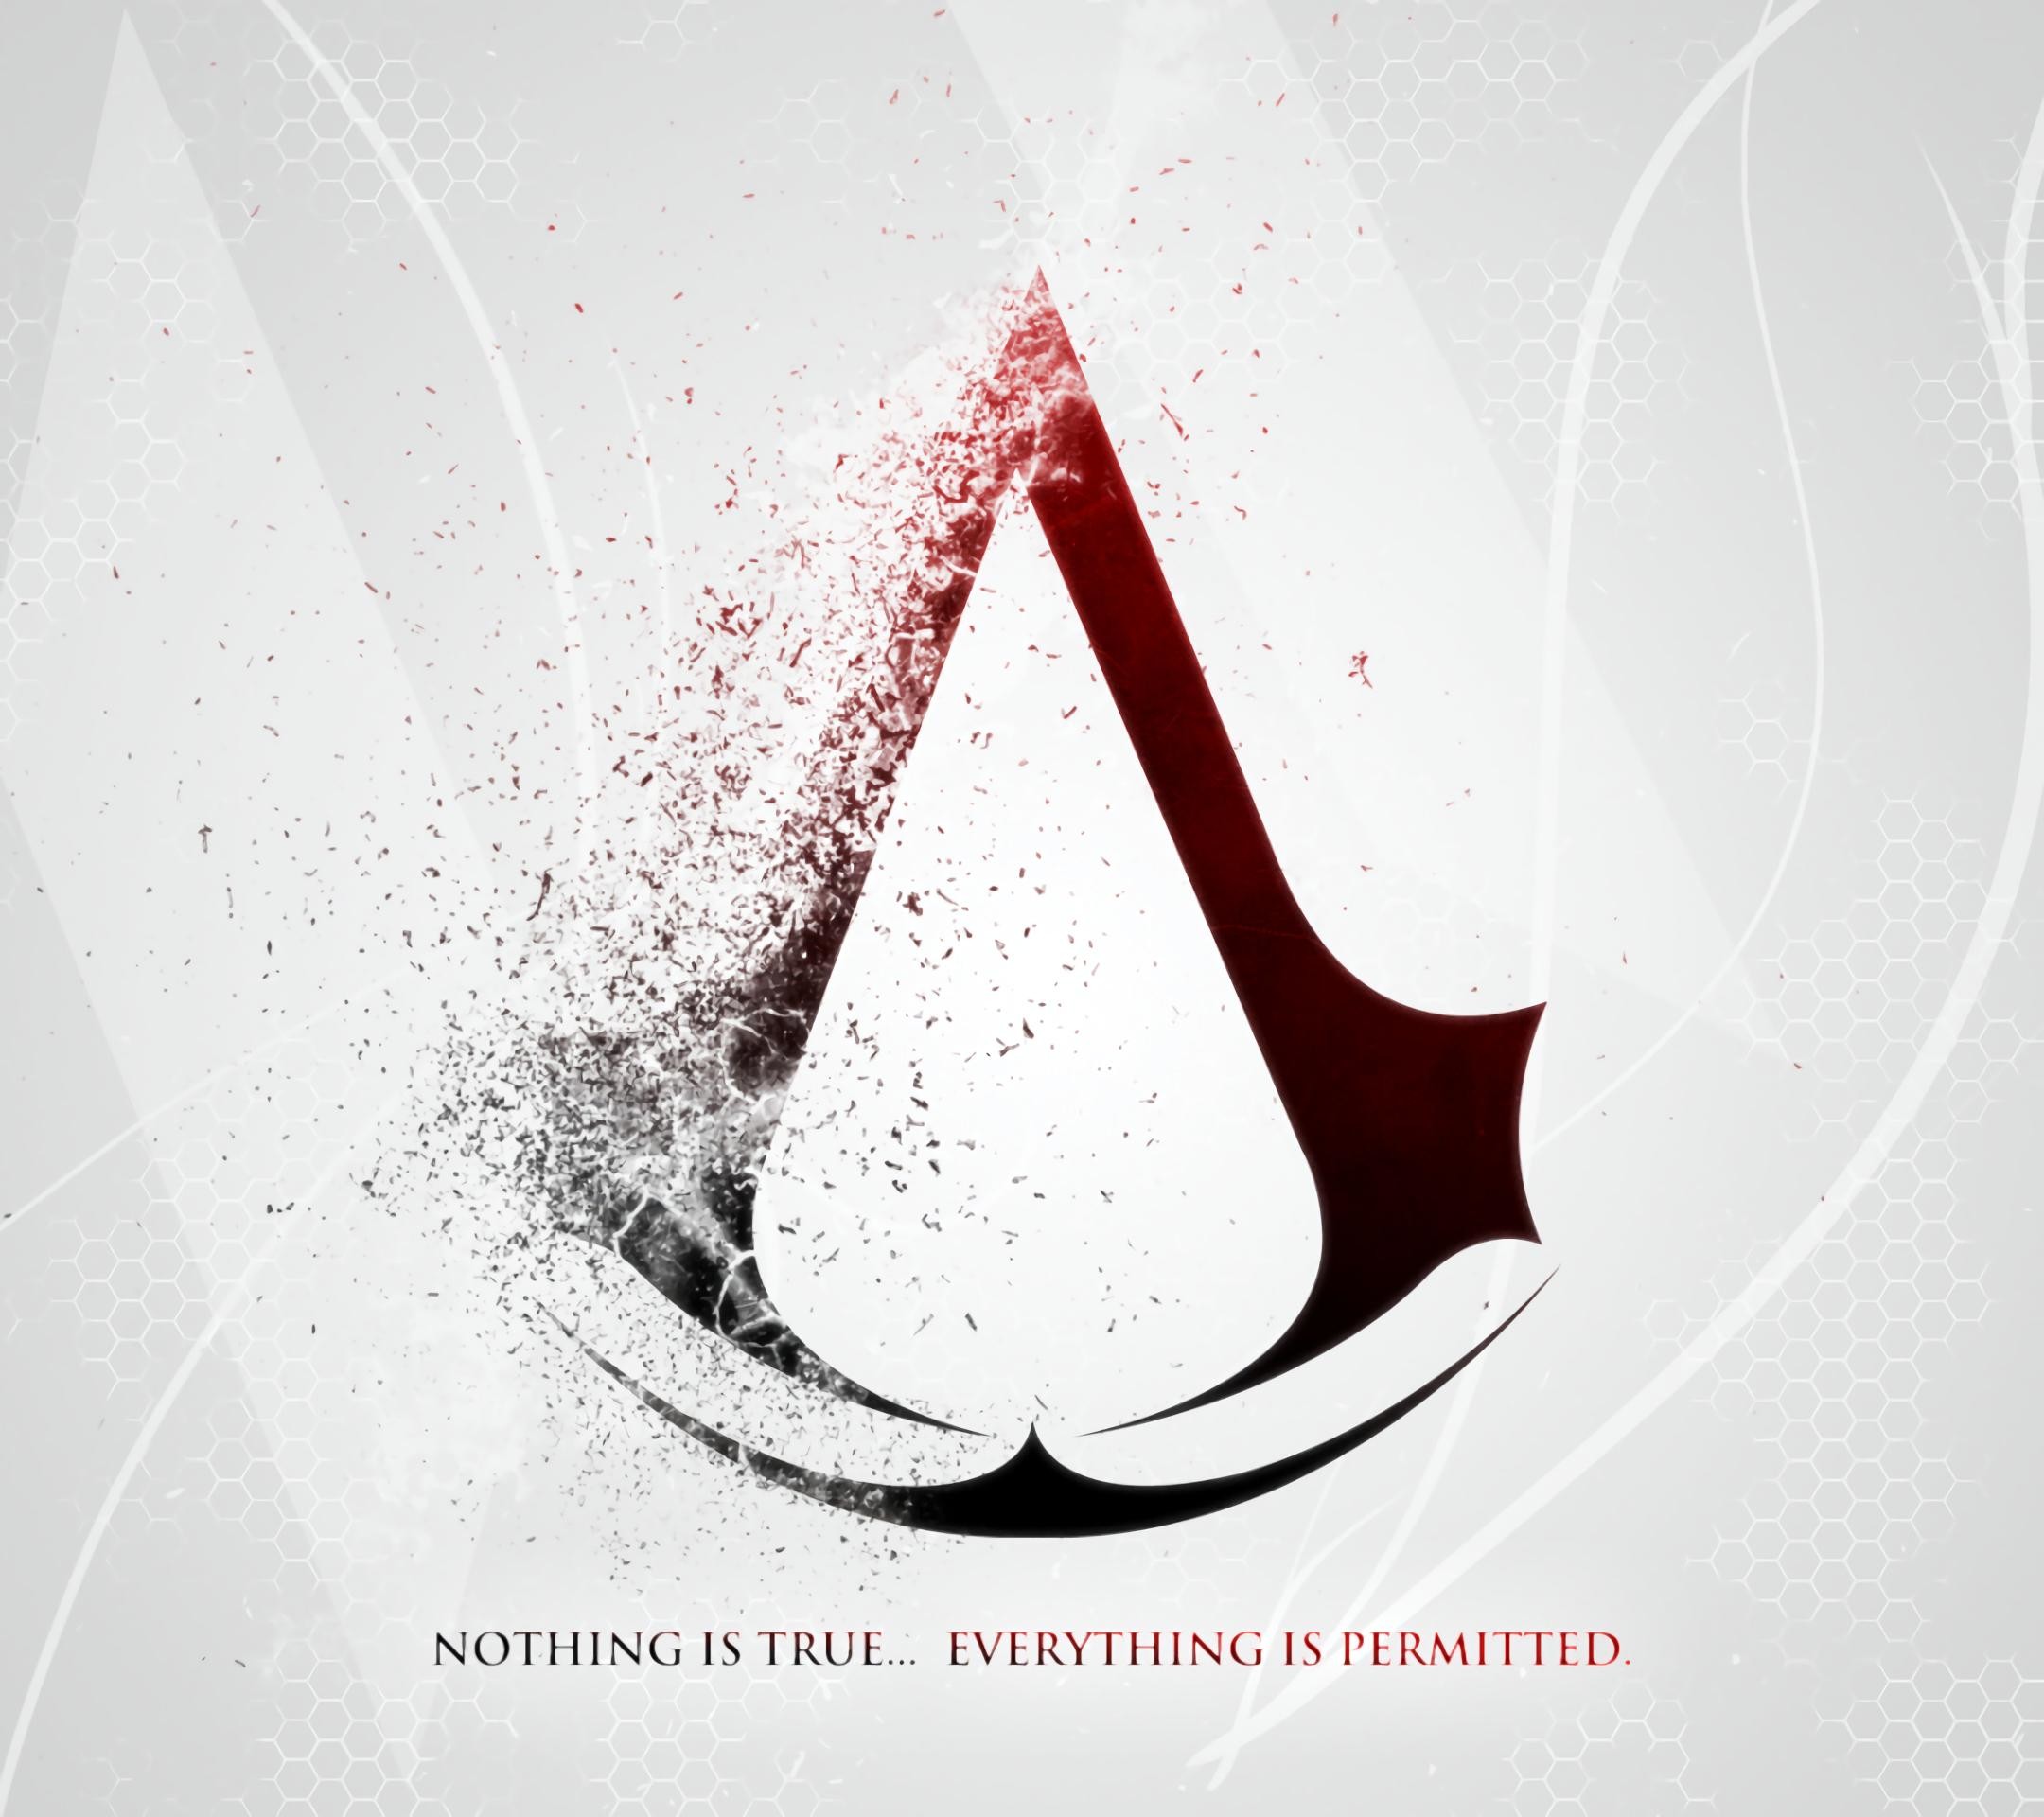 2160x1920 undefined Assassin's Creed Wallpaper Wallpapers)